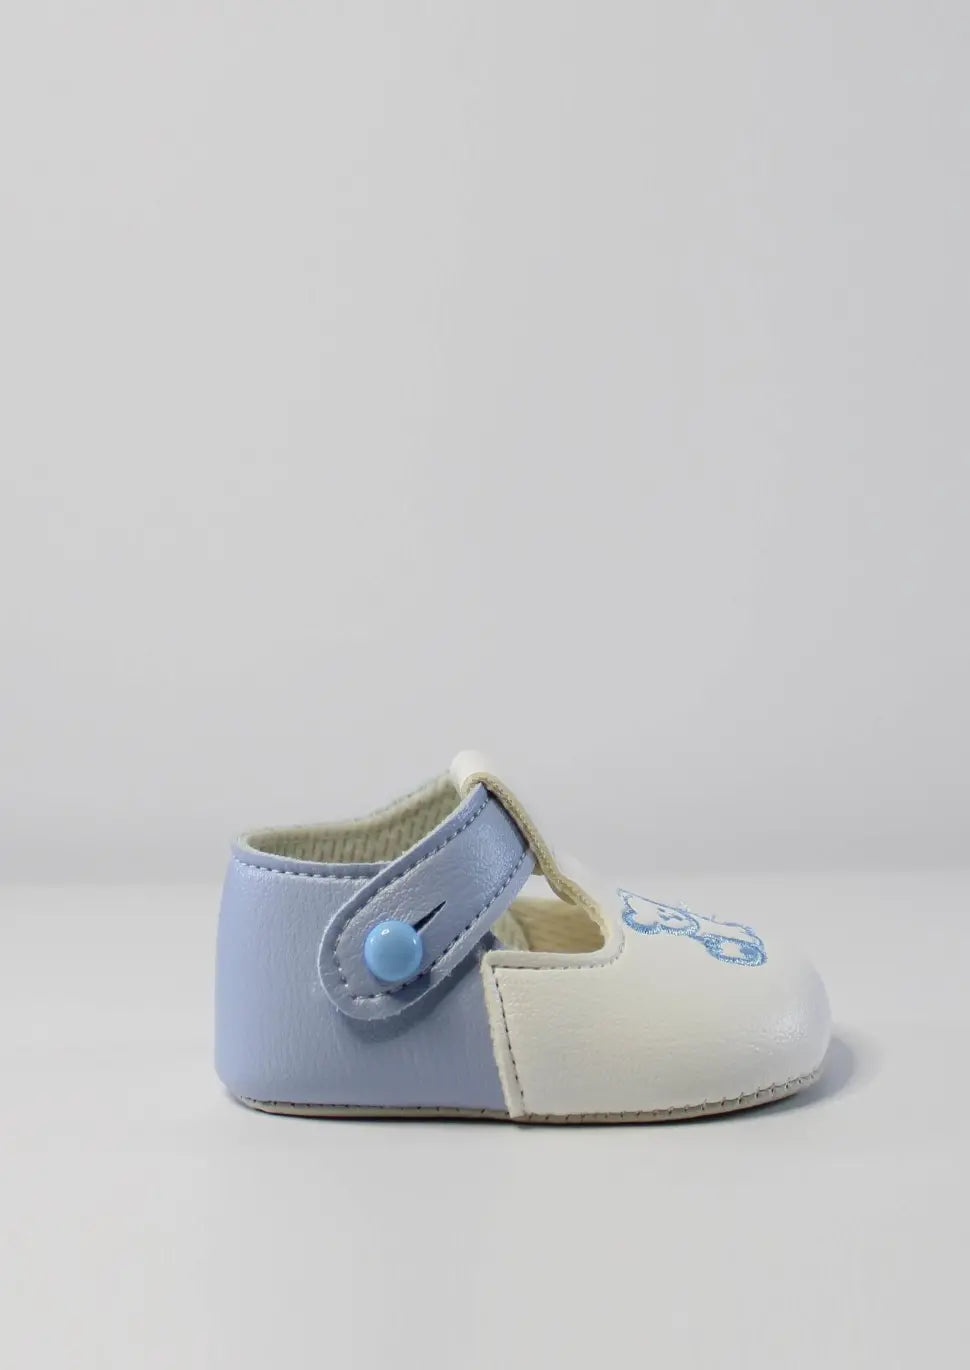 sky and white baypod shoes with teddy motif from tors childrens wear